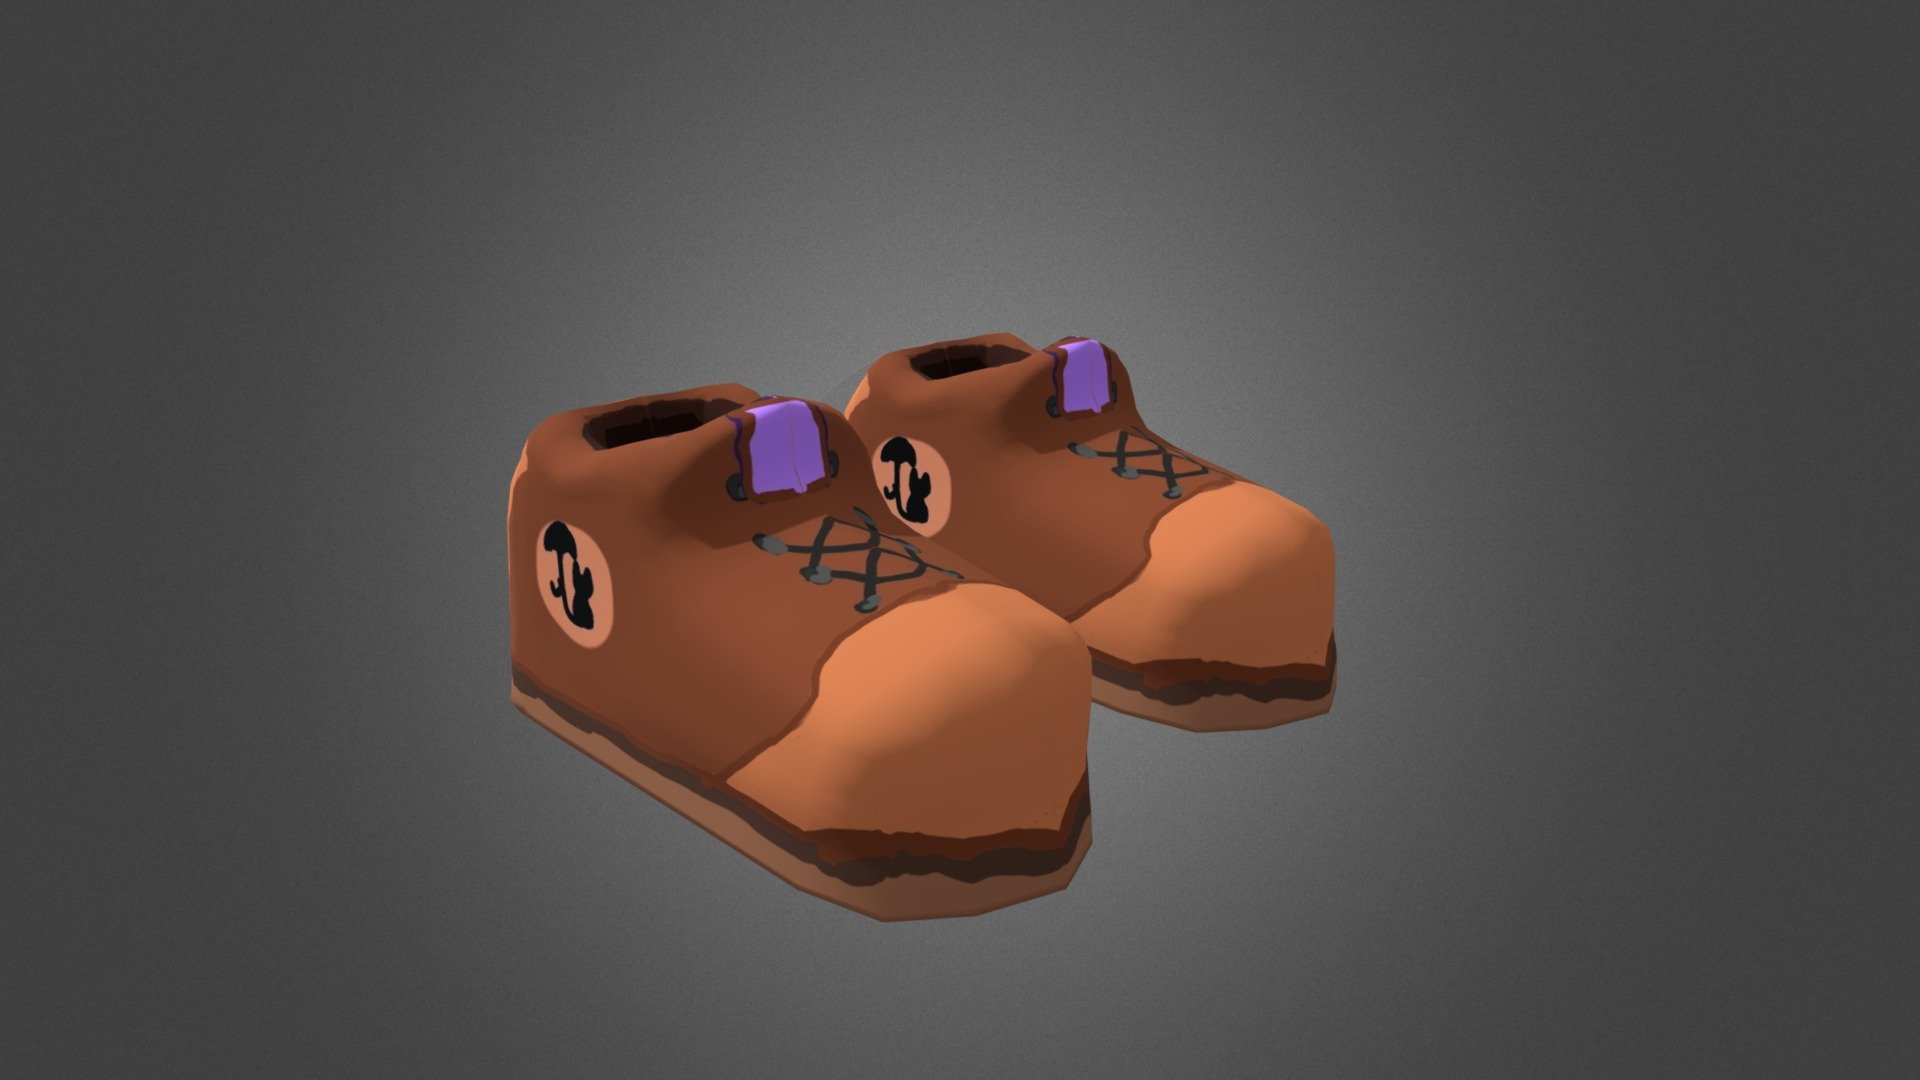 Simple cartoon-like shoes for a game in progress called &ldquo;REM State